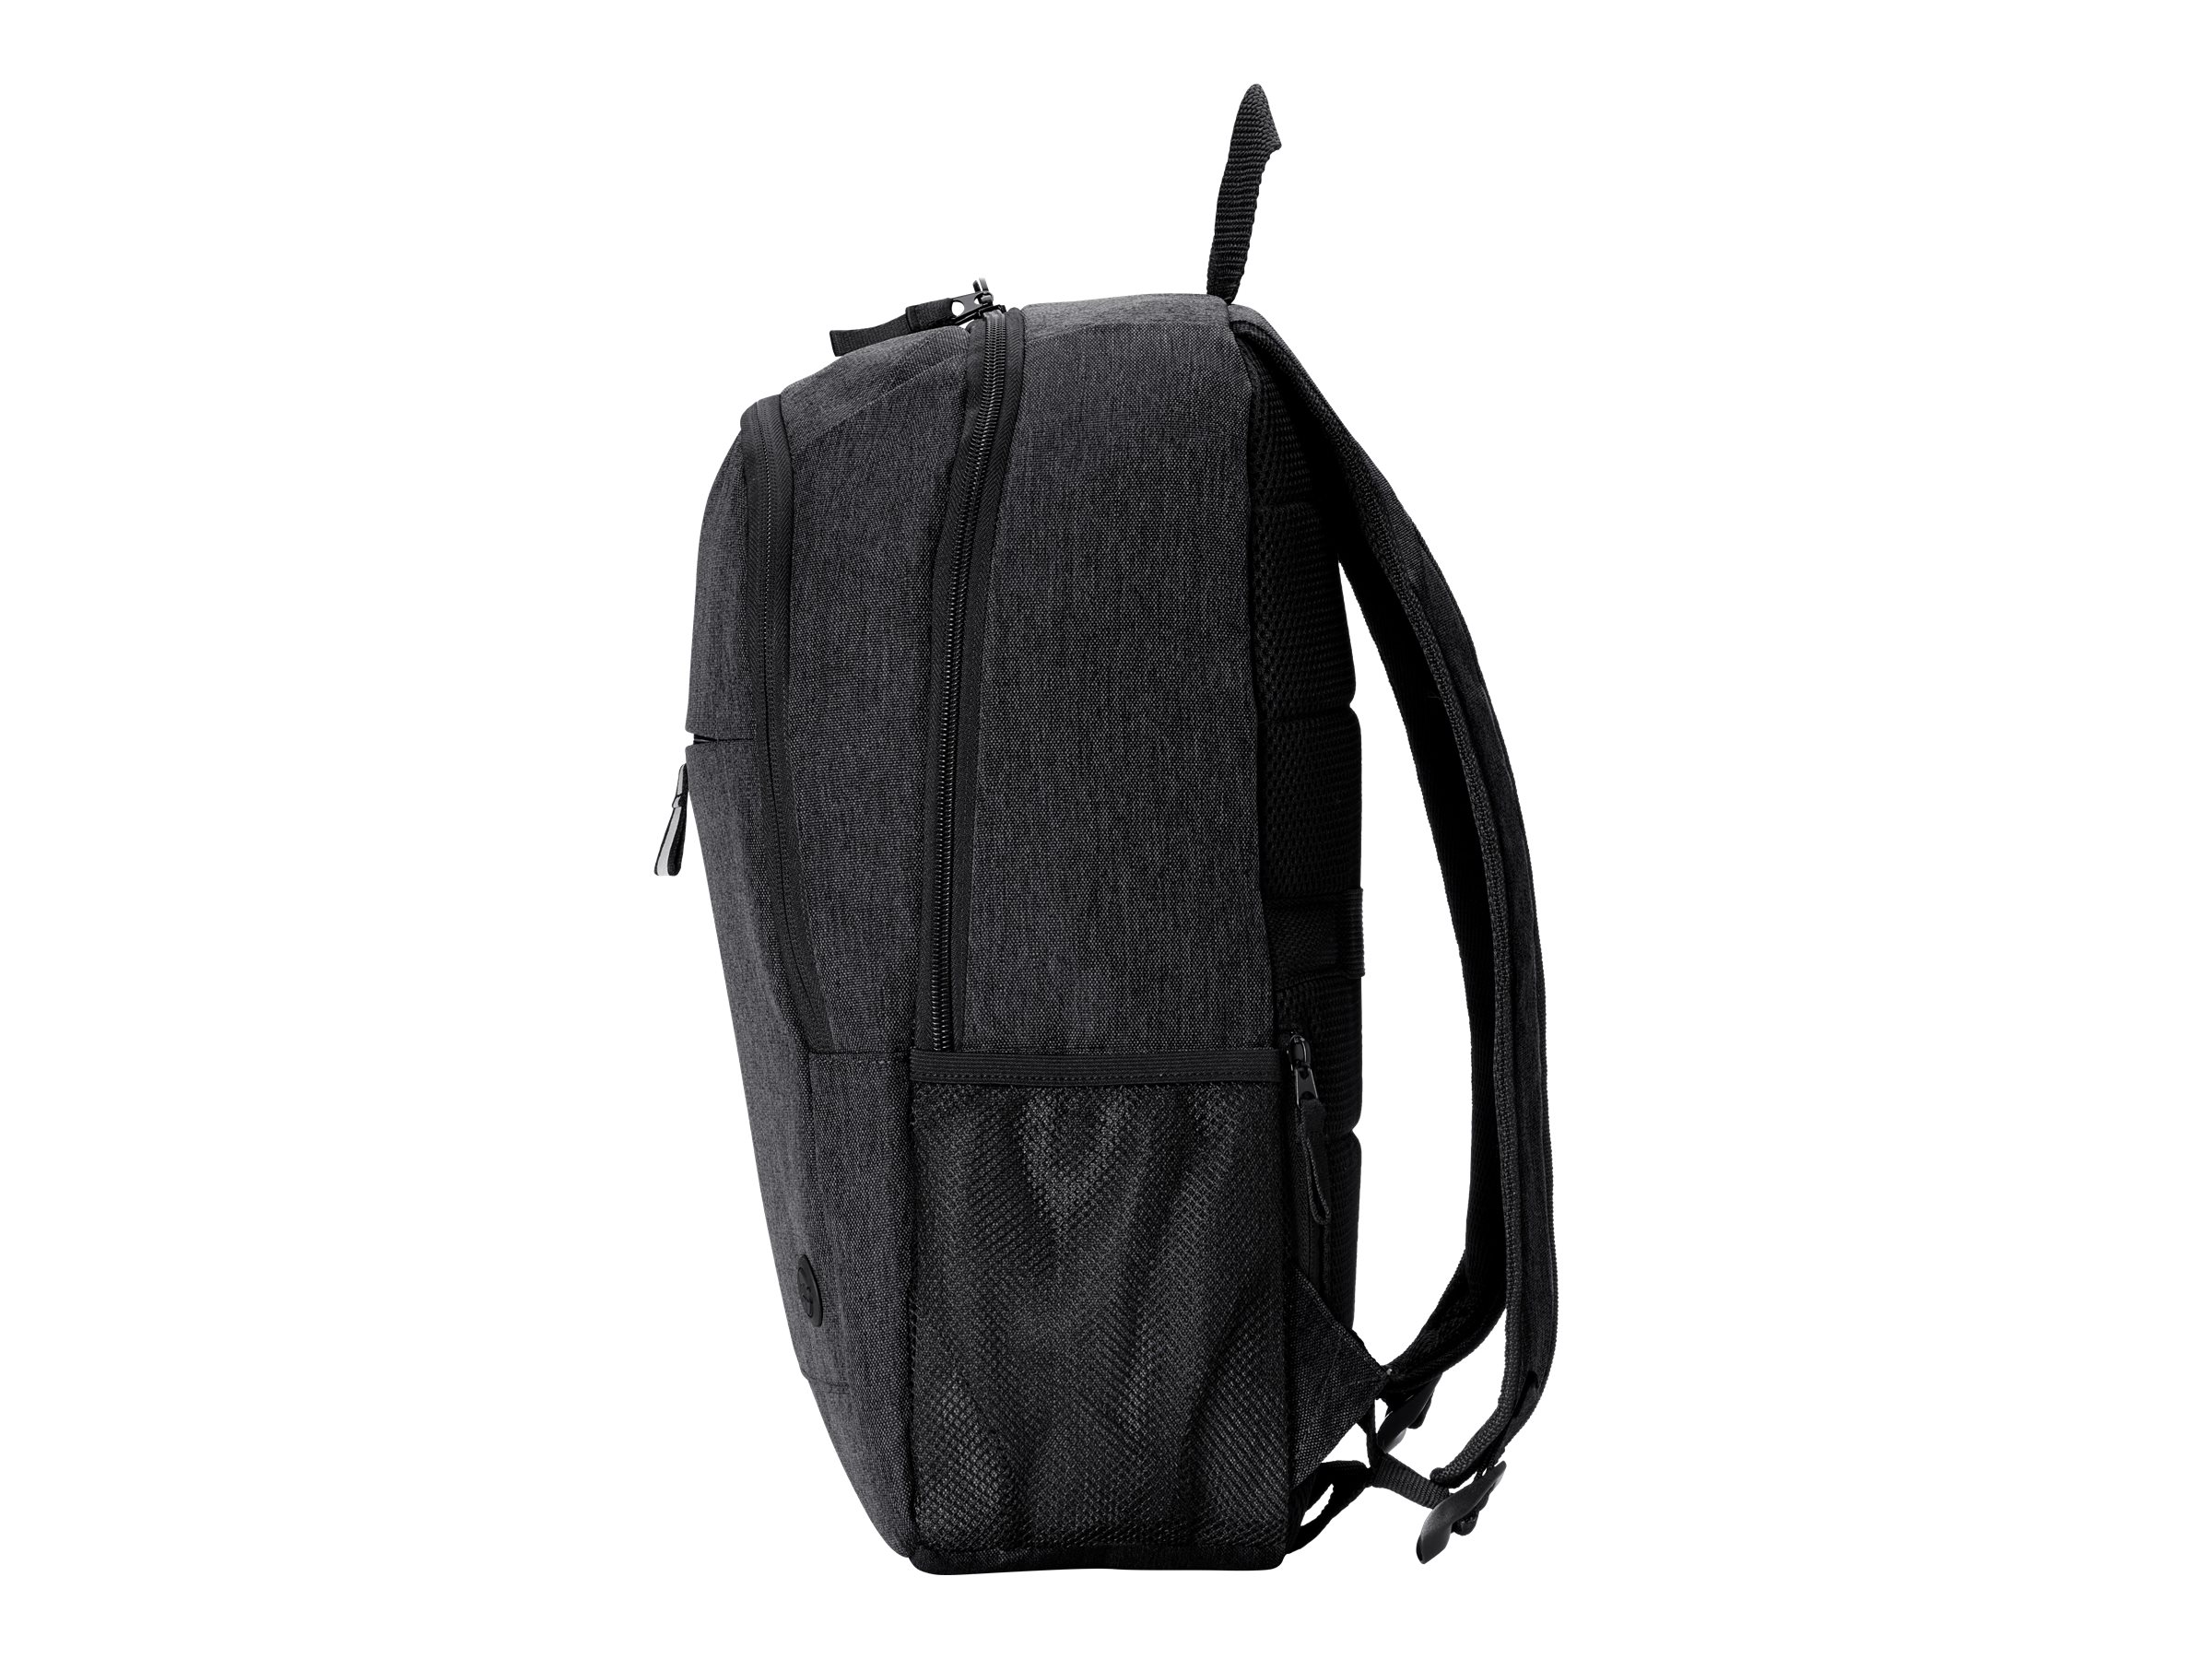 HP Prelude Pro Recycled Backpack - Sac à dos pour ordinateur portable - 15.6" - pour Elite Mobile Thin Client mt645 G7; Pro Mobile Thin Client mt440 G3; ZBook Fury 16 G10 - 1X644AA - Sacoches pour ordinateur portable